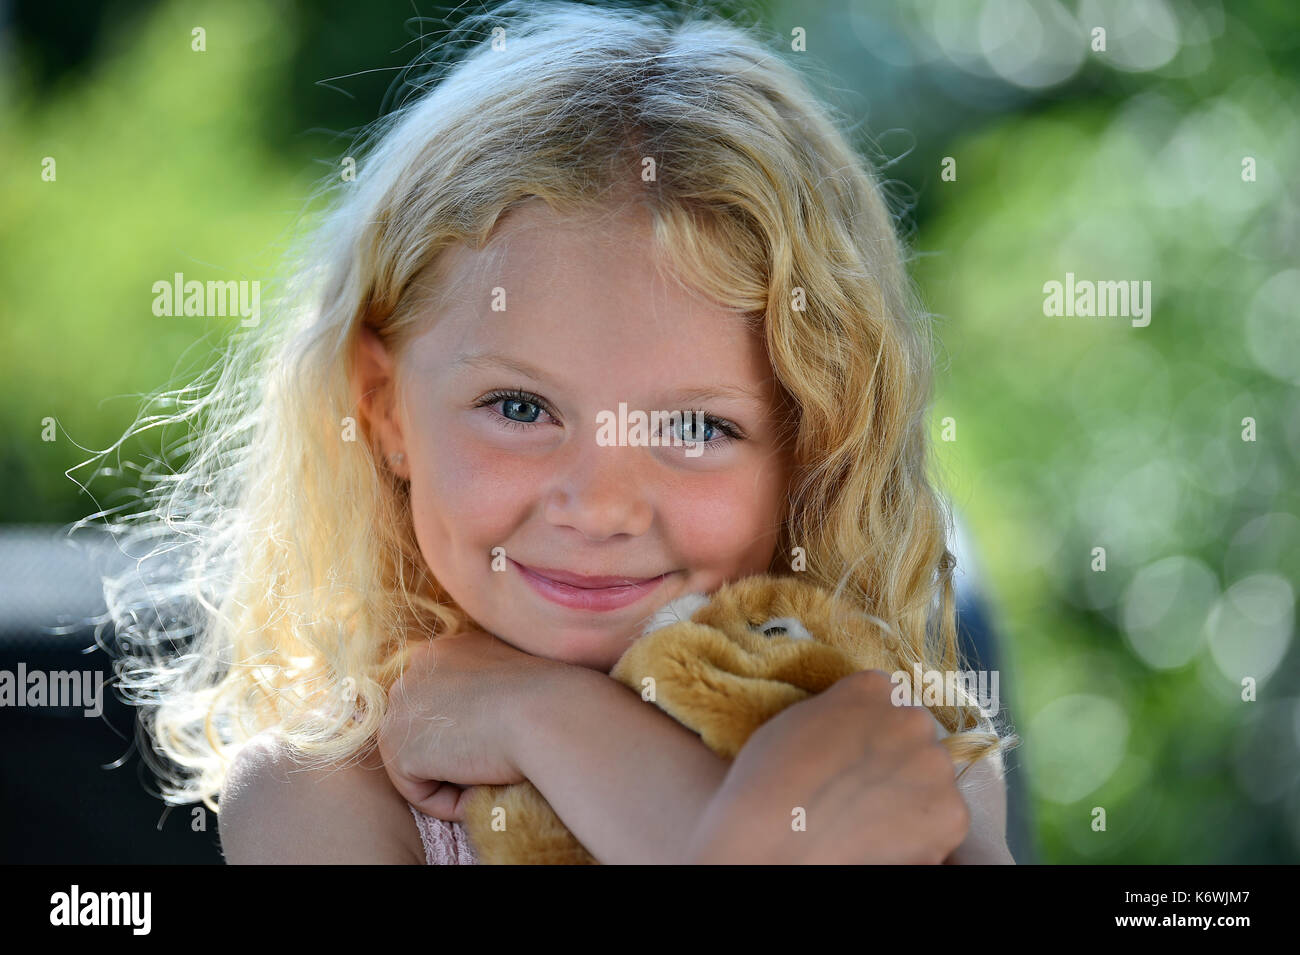 Little girl with blonde hair and cuddly toy, portrait, Sweden Stock Photo